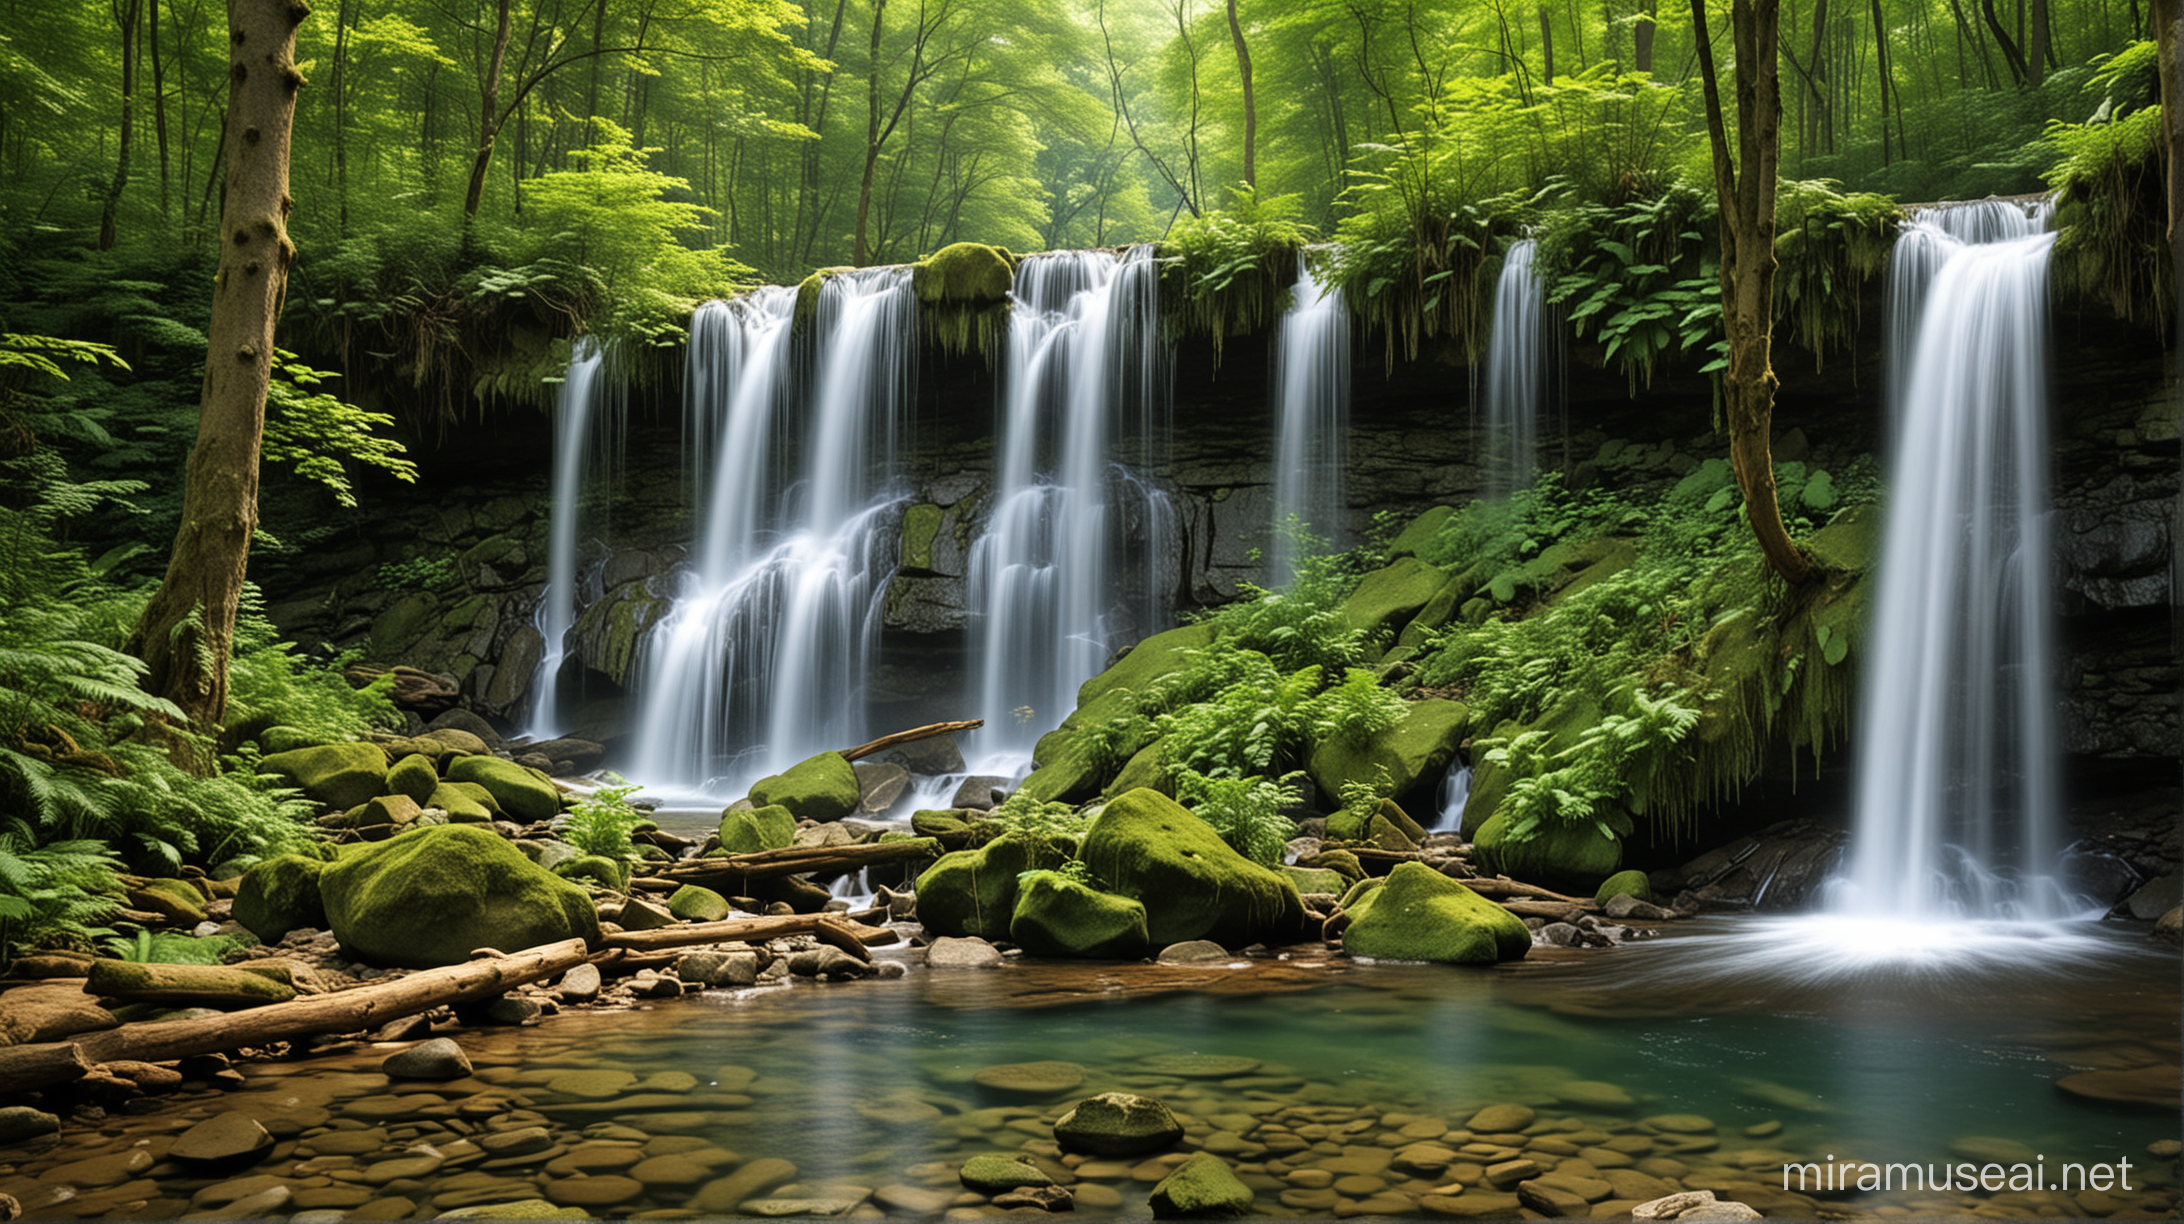 Tranquil Forest Waterfall A Serene Escape into Natures Majestic Beauty